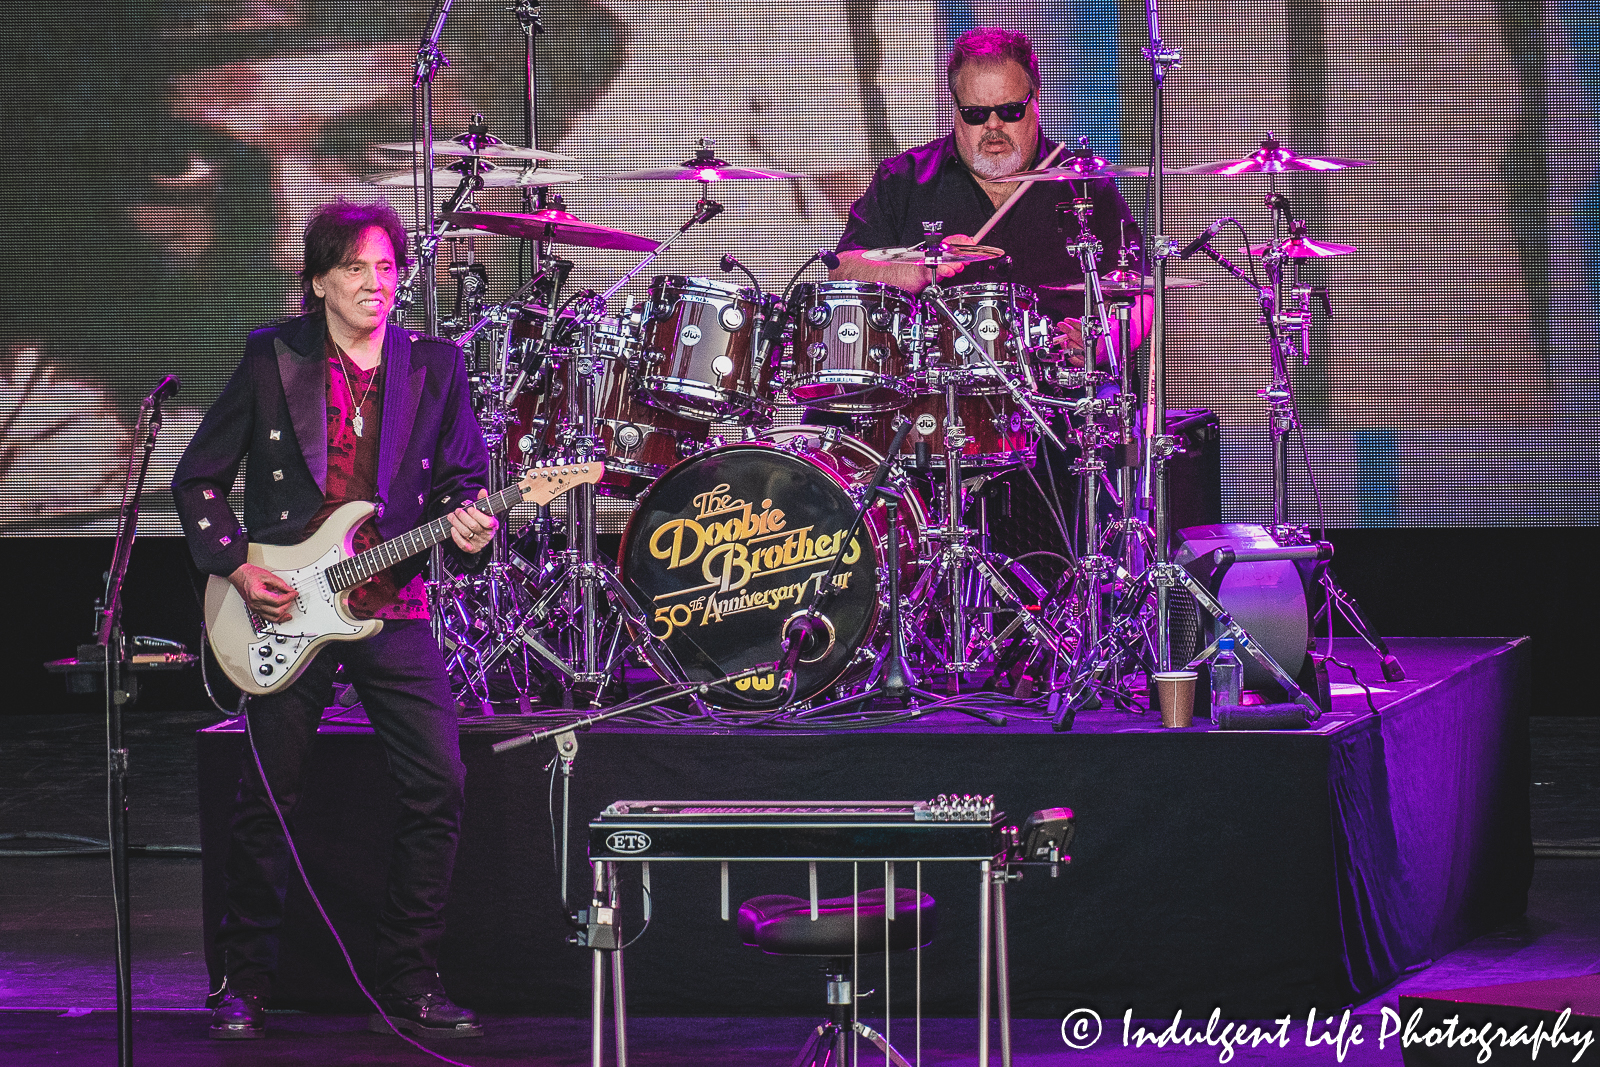 Doobie Brothers founding member John McFee performing with drummer Ed Toth at Starlight Theatre in Kansas City, MO on June 14, 2023.